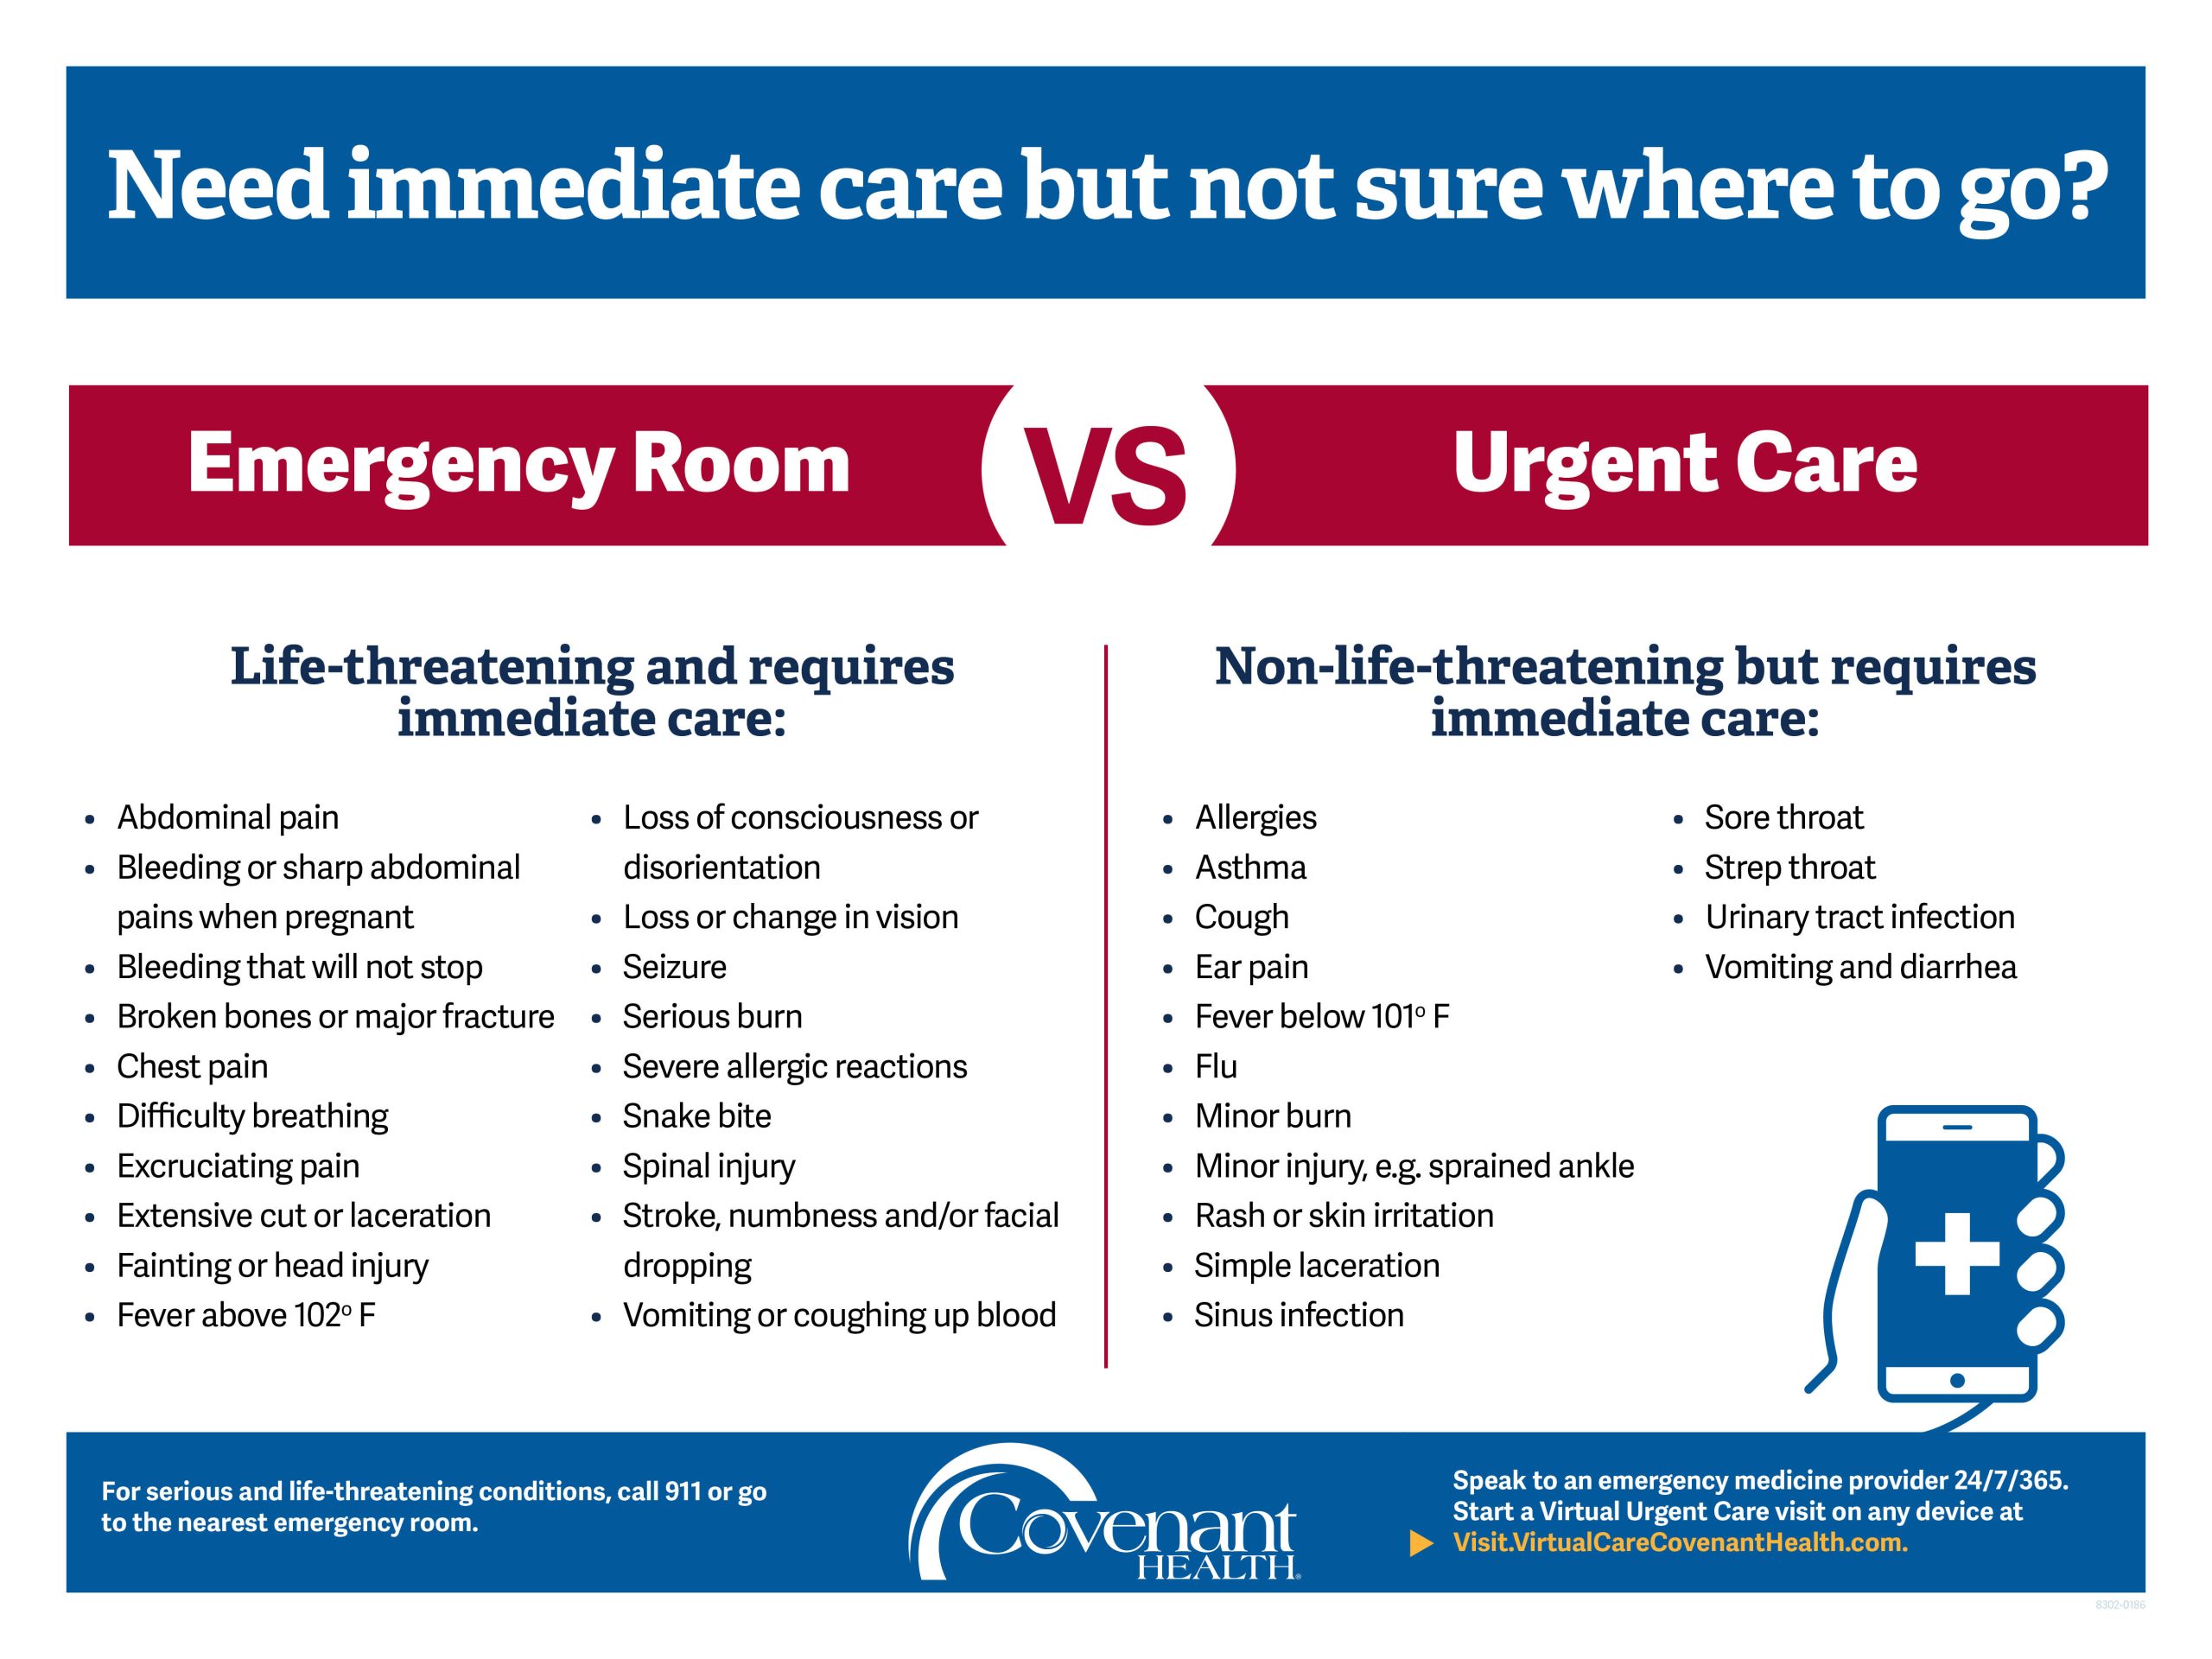 Description of which services are offered at urgent care versus an emergency room